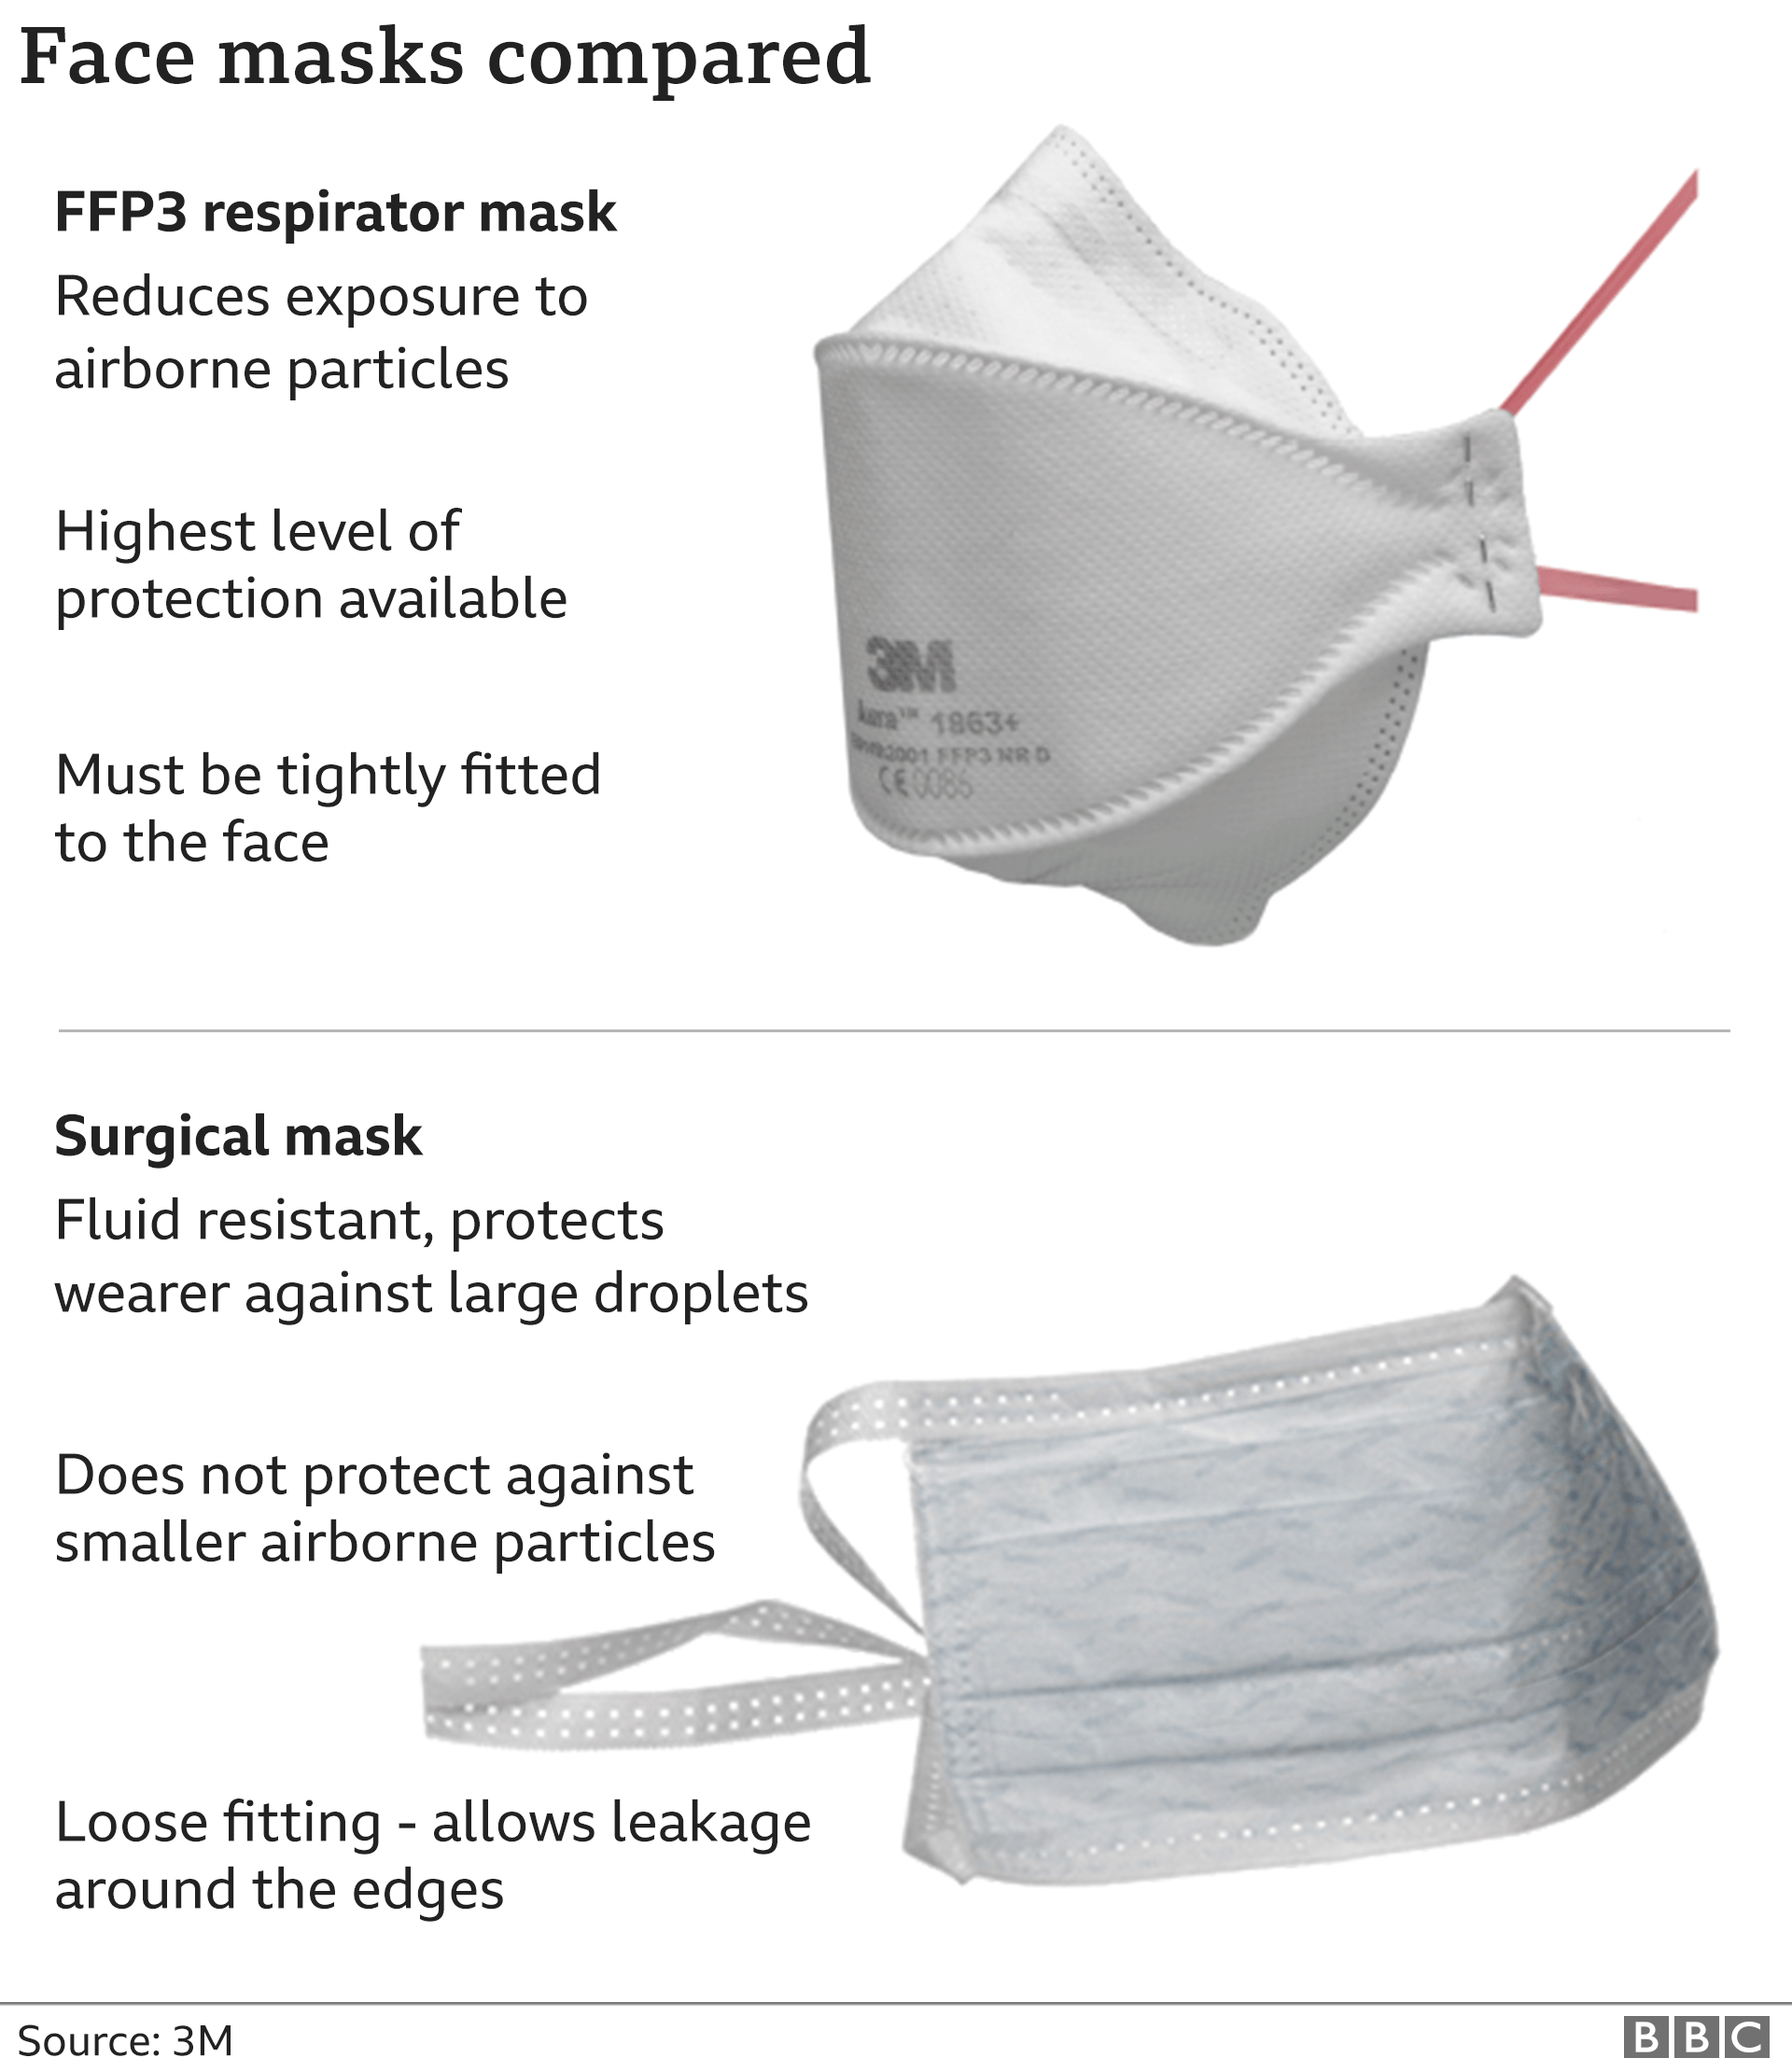 Two types of mask compared: a FFP3 respirator mask and a surgical mask